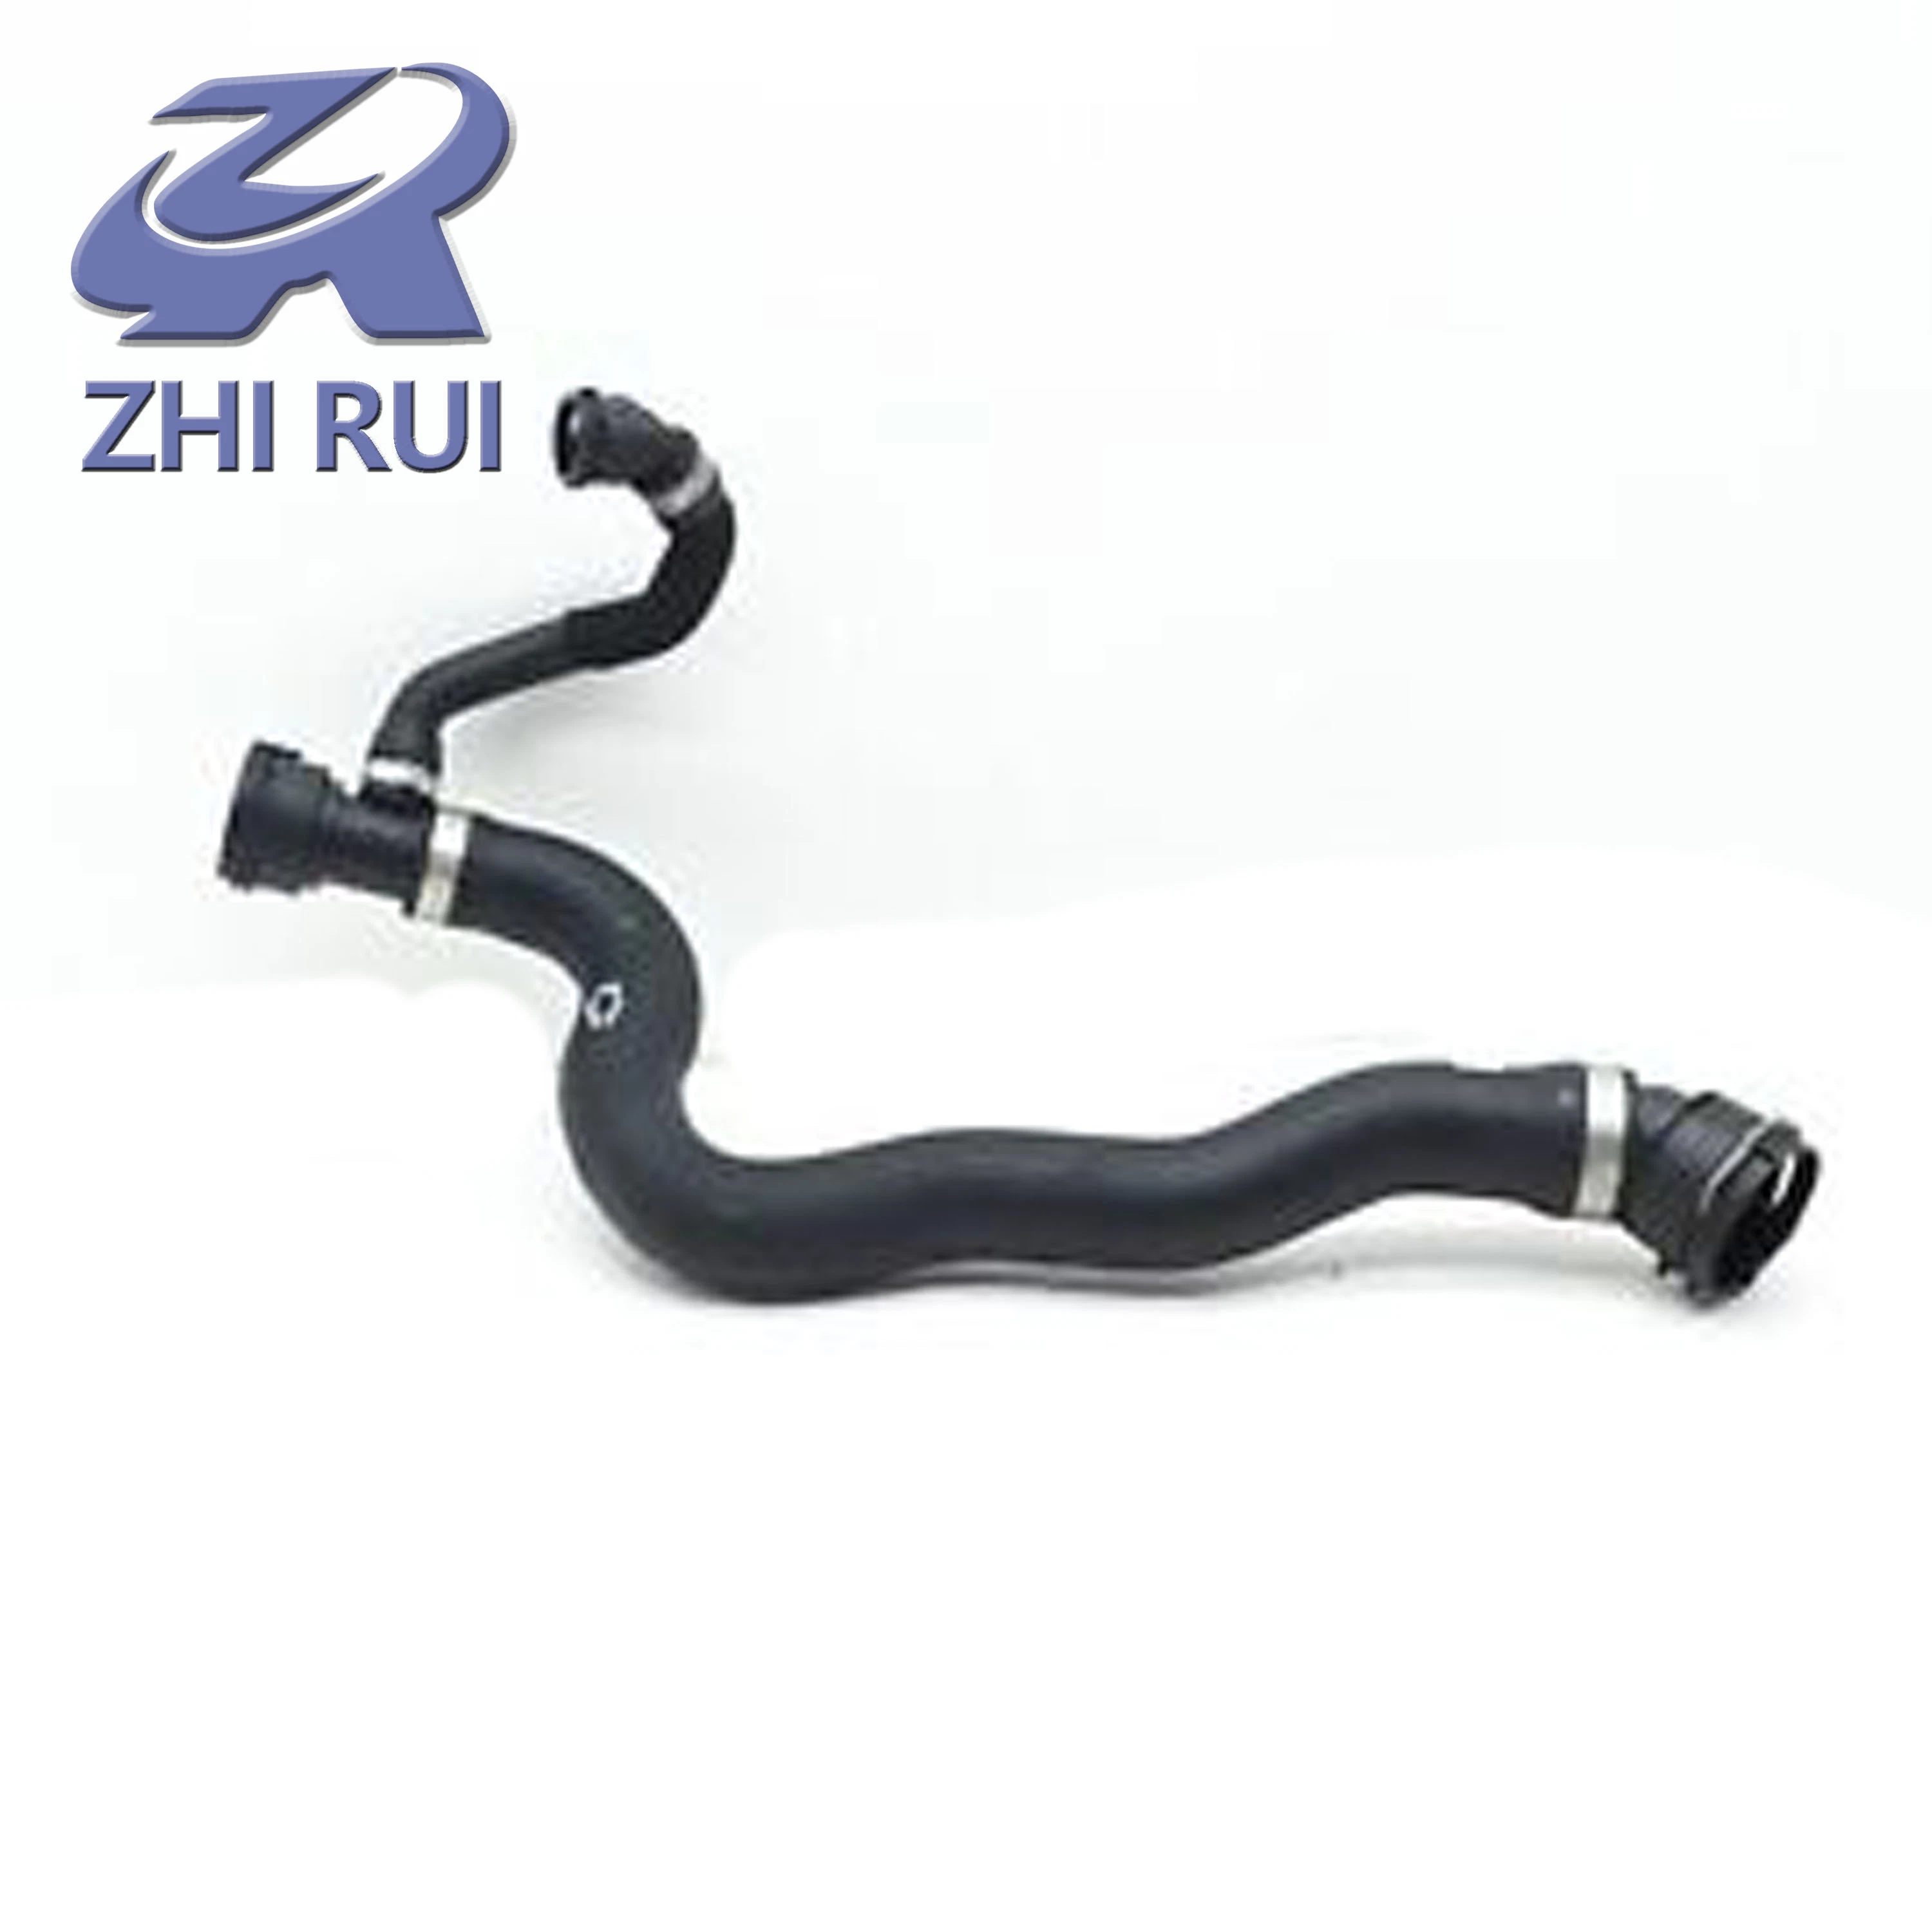 1712 9797 615 Auto Engine Parts Automobile Engine Structure Cooling System Water Pipe for BMW Xdrive25I M Xdrive25I OEM 17129797615